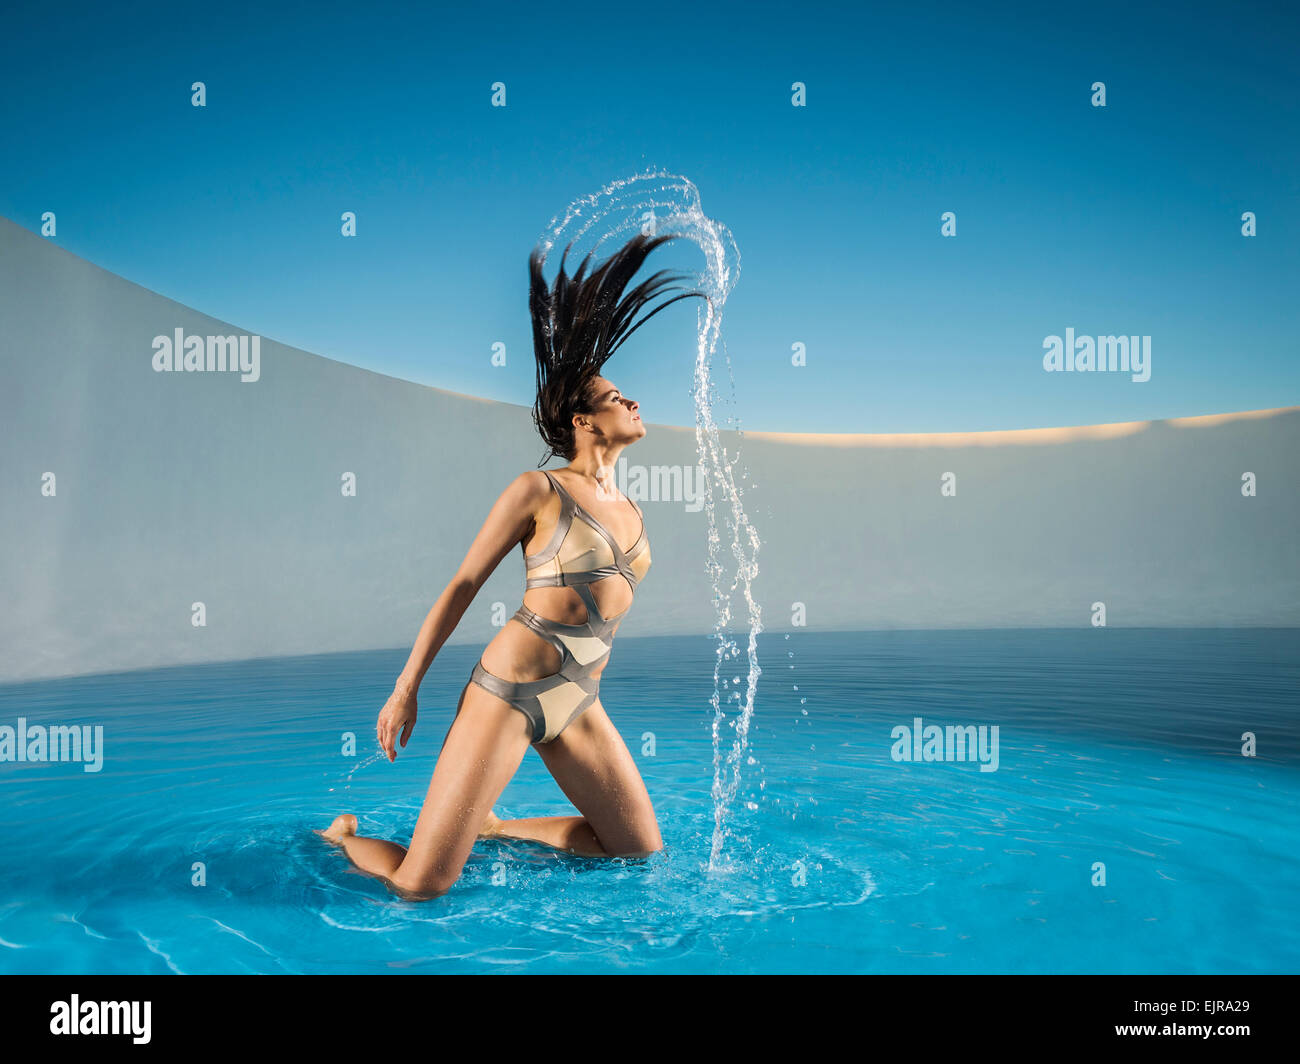 Caucasian woman tossing hair on swimming pool Stock Photo